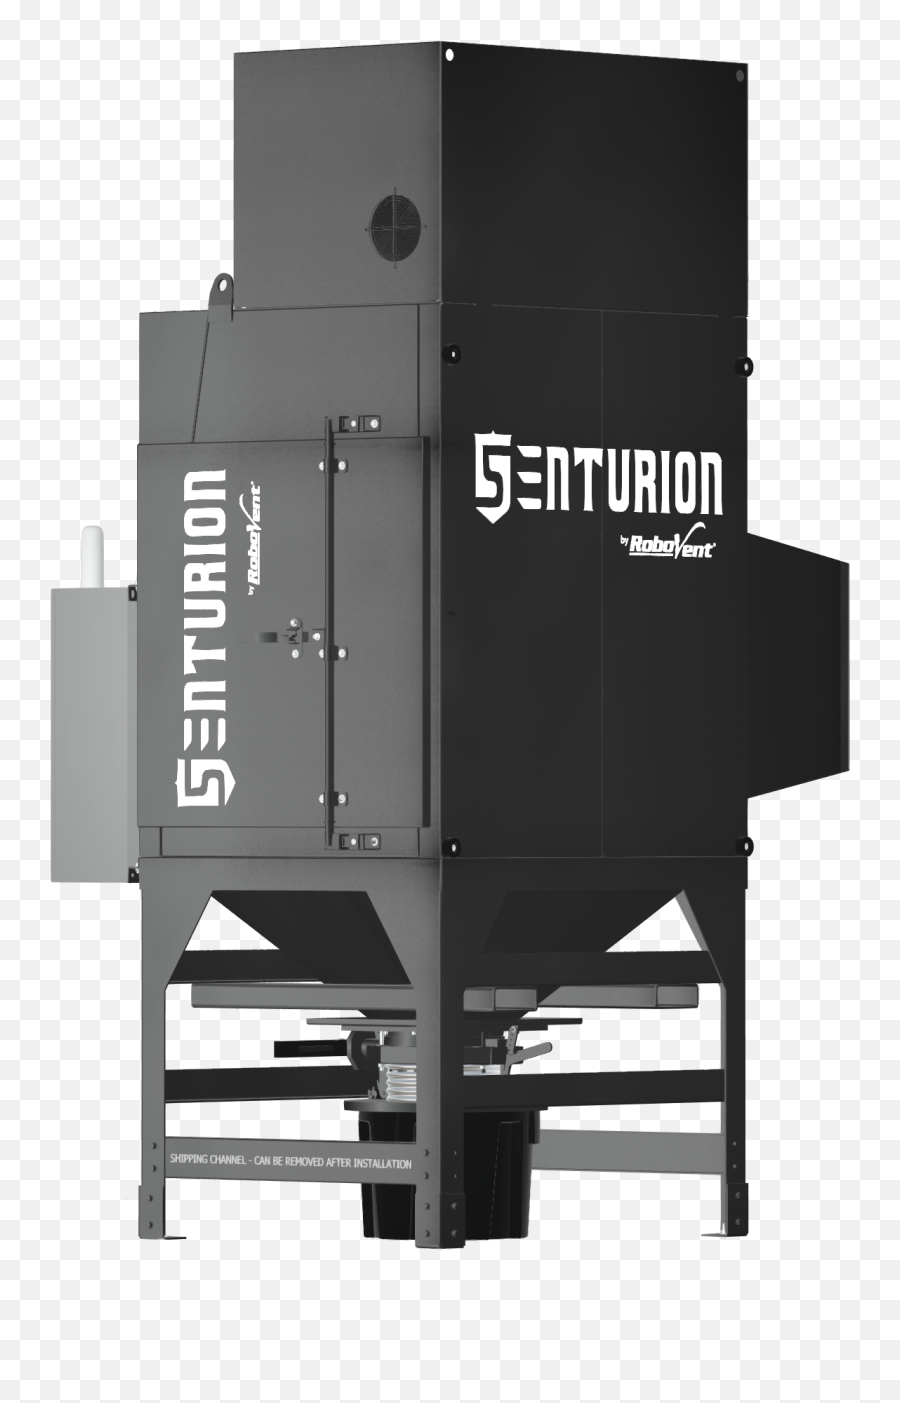 Robovent Senturion - Designed For Fiber Laser Dust Control Vertical Png,Airflow Icon Extractor Fan Not Working